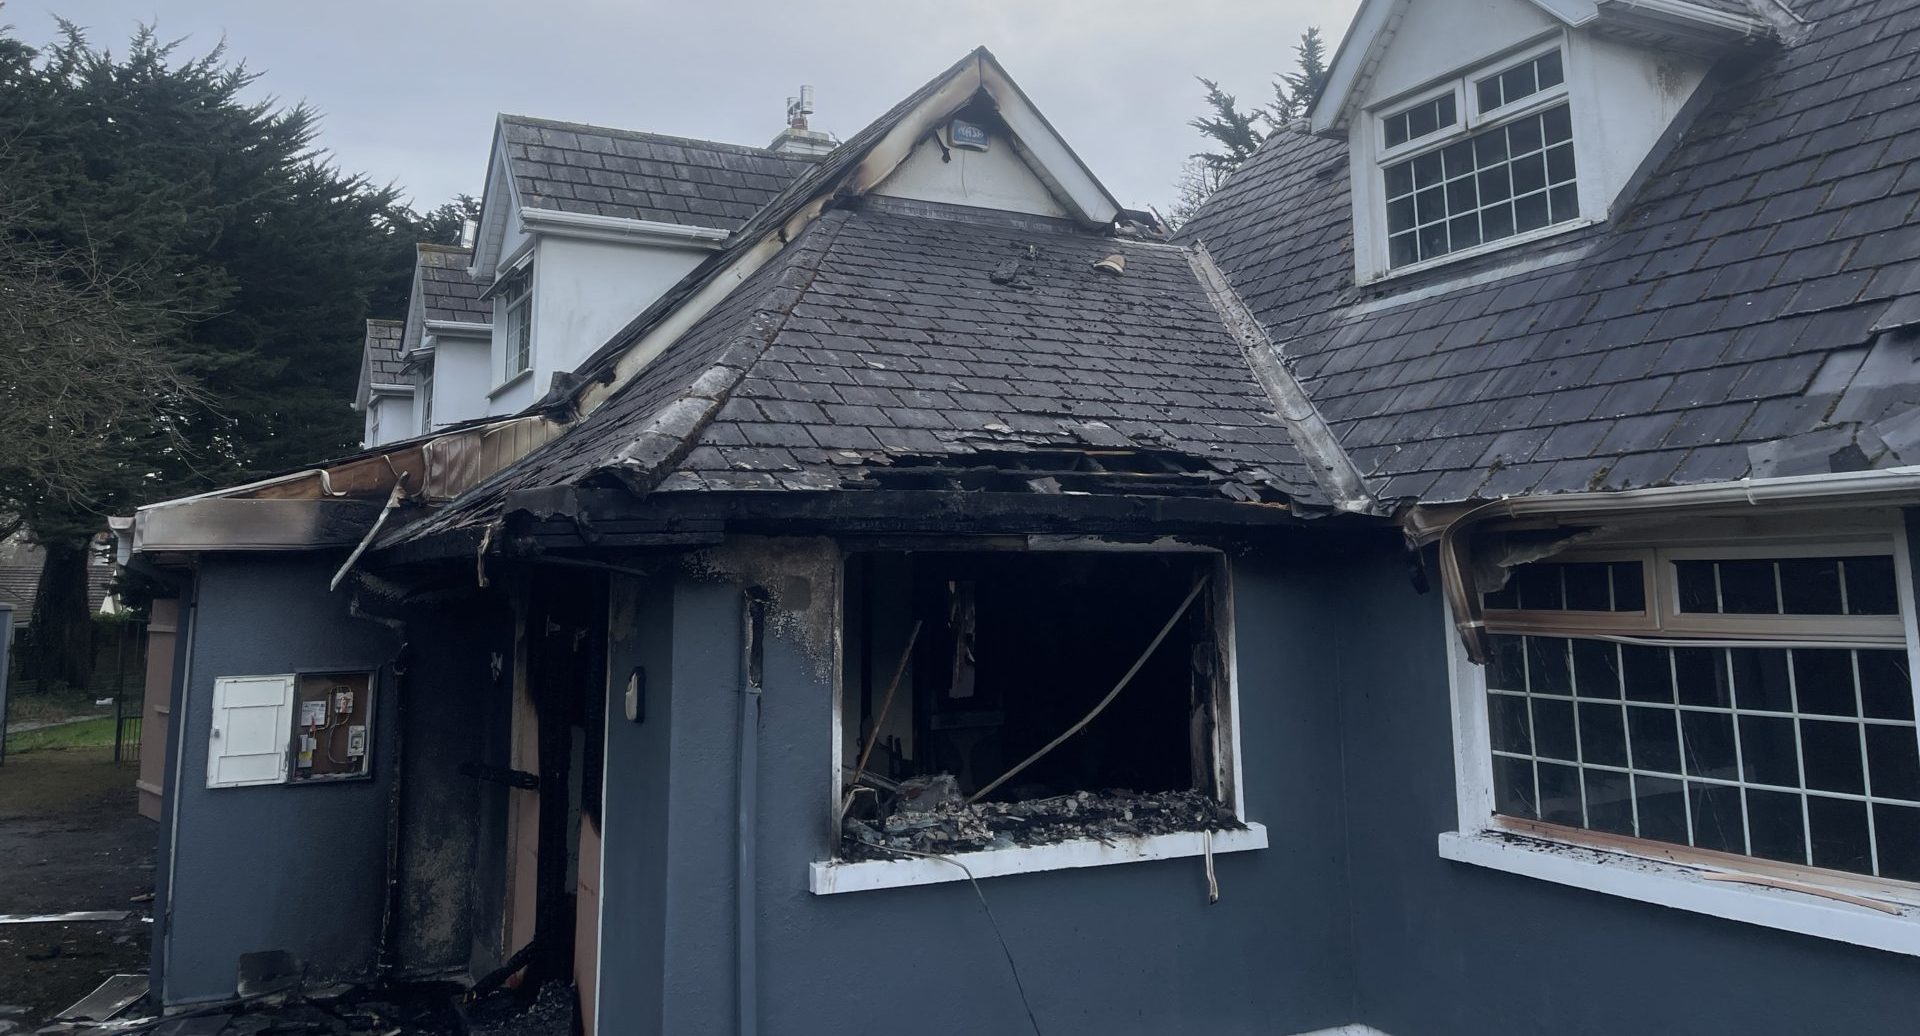 Property after suspected arson attack in Kildare.